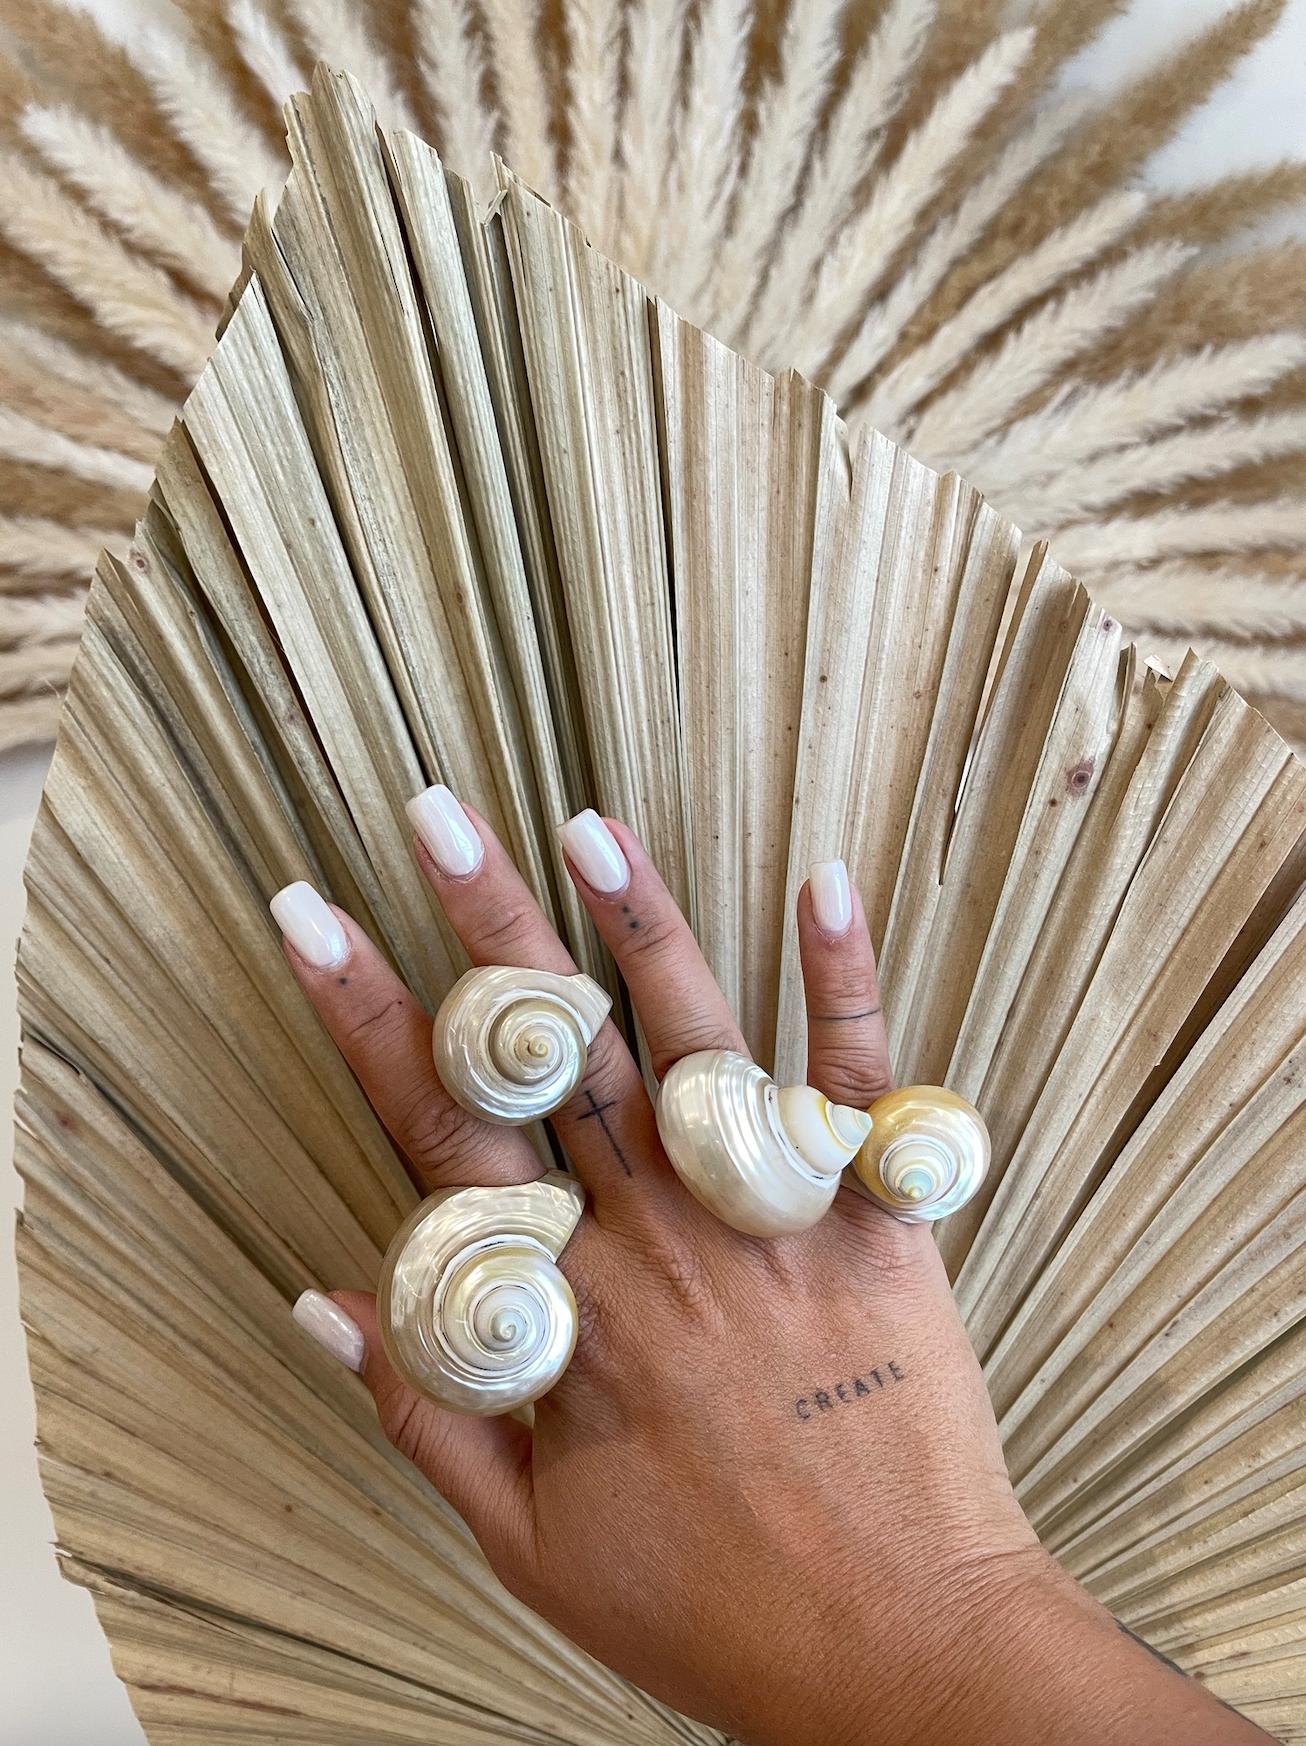 The Ocean Life Shell Statement Ring